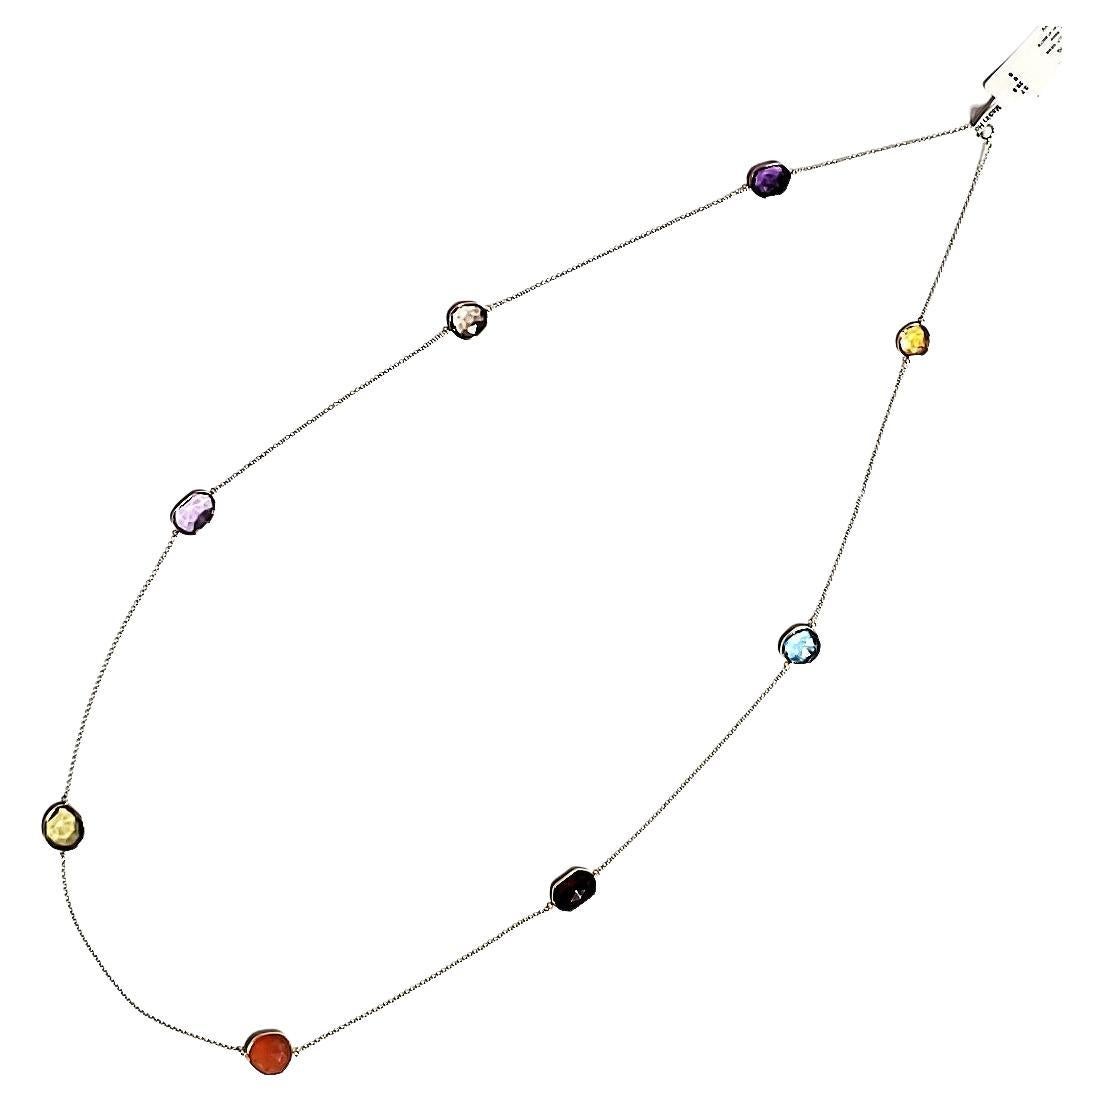 EJ 1478

8 stone multicolor necklace in 18 K gold. (Stock code EJ  1478) 

Be surrounded by Gems of the world ! A fascinating array of colored, faceted rose cut treasures on an 18 K gold chain! 

Each stone has its own powers and the combination of